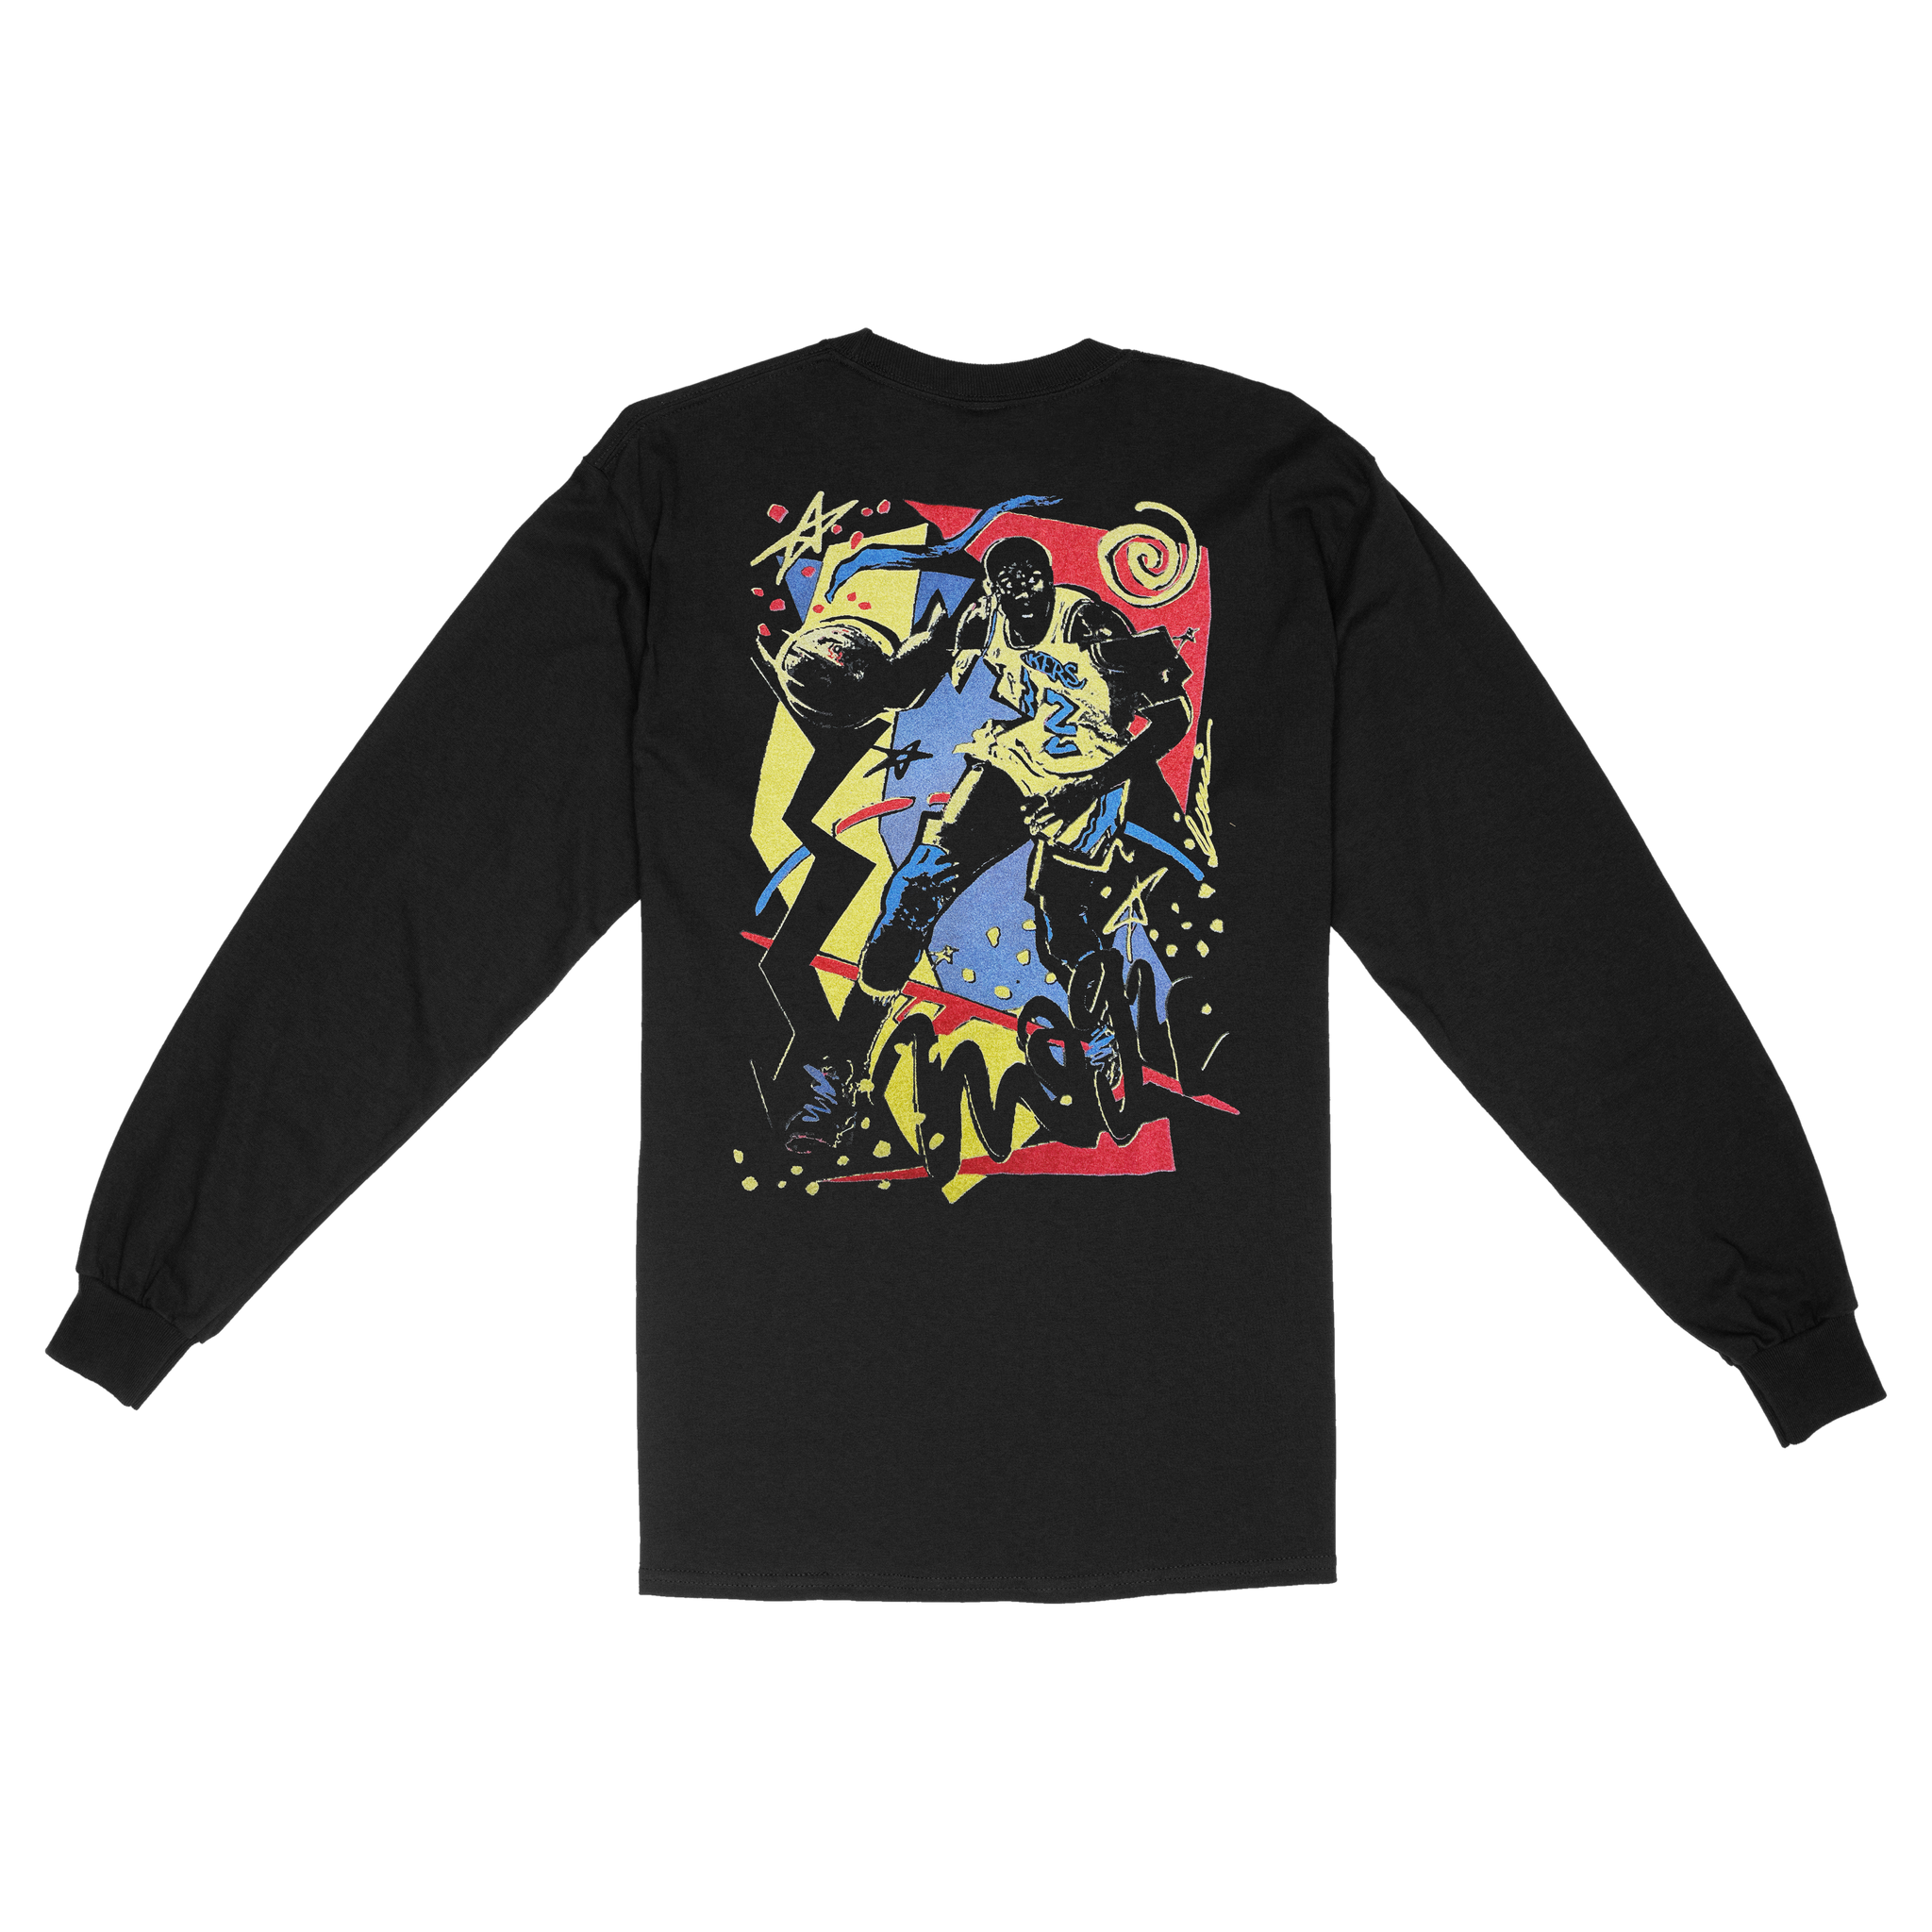 back side of longsleeve shirt with graphics of magic johnson playing basketball